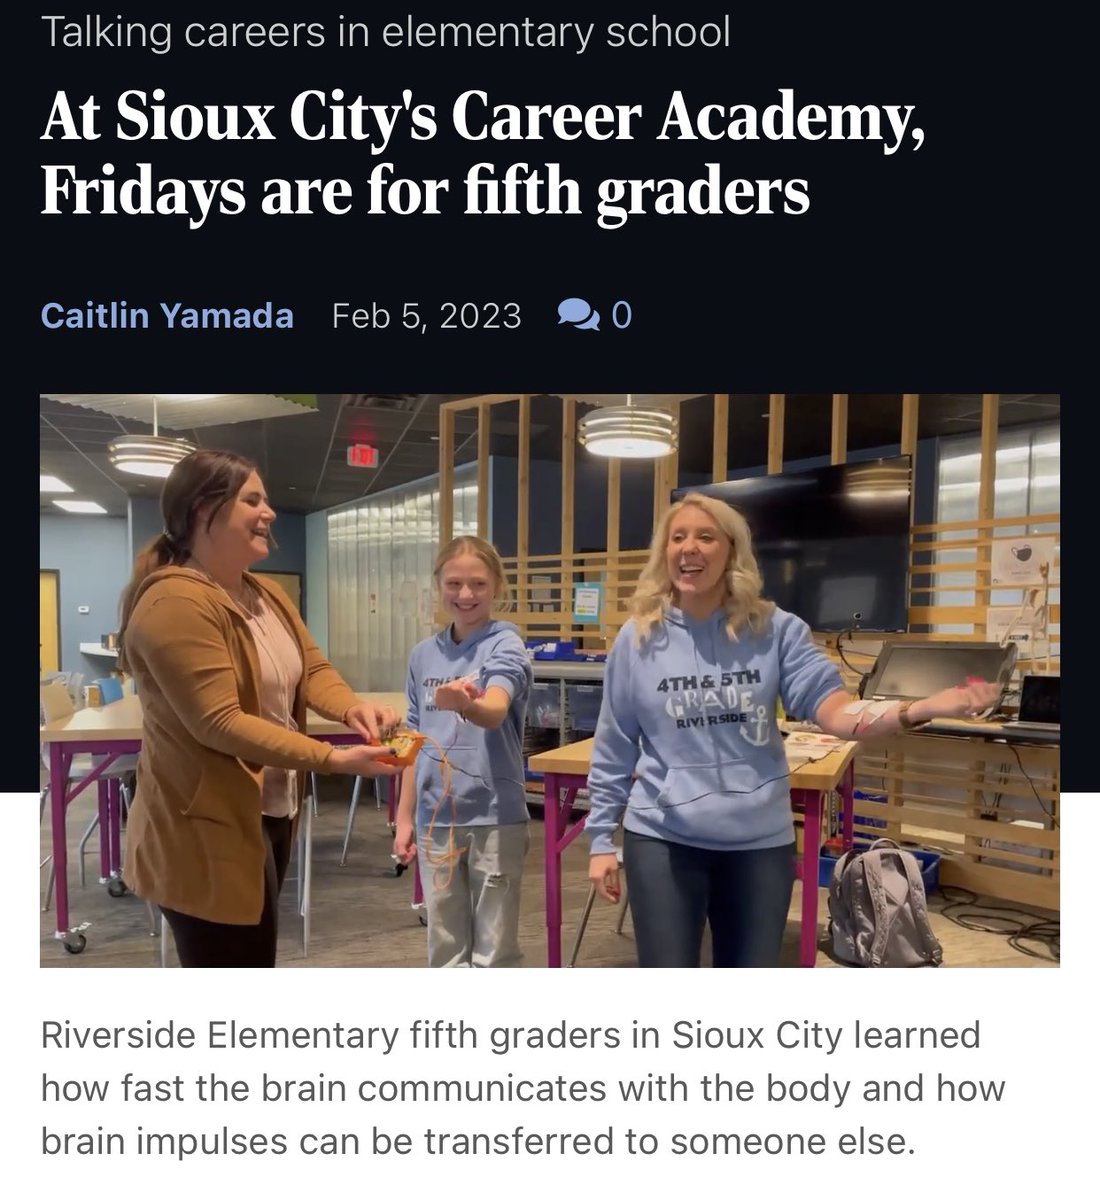 Read all about our Fridays are for 5th Graders events in the Sioux City Journal! siouxcityjournal.com/news/local/edu…  #STEM #CTEmonth #siouxland @BackyardBrains @SCCareerAcademy @locatesiouxcity @LGStange @aelebo